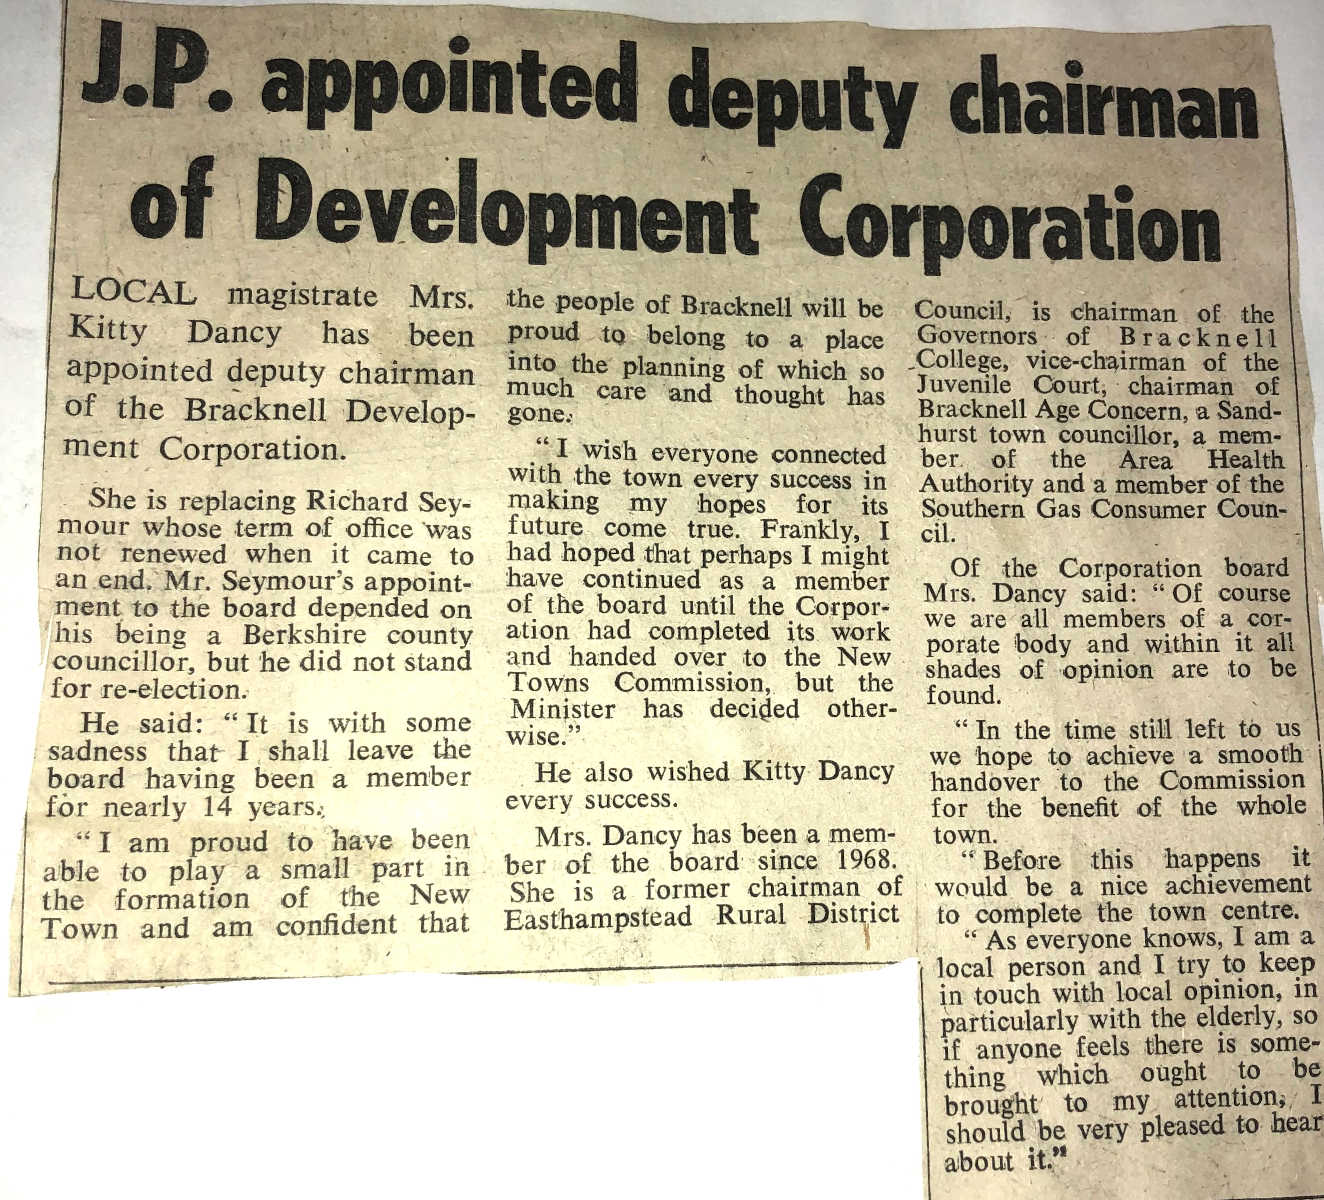 Newspaper article on the appointment of Kathleen Dancy to Deputy Chairman of the Bracknell Development Corporation. Bracknell News, 18th August 1977 ref. NTB/G/26/1/26